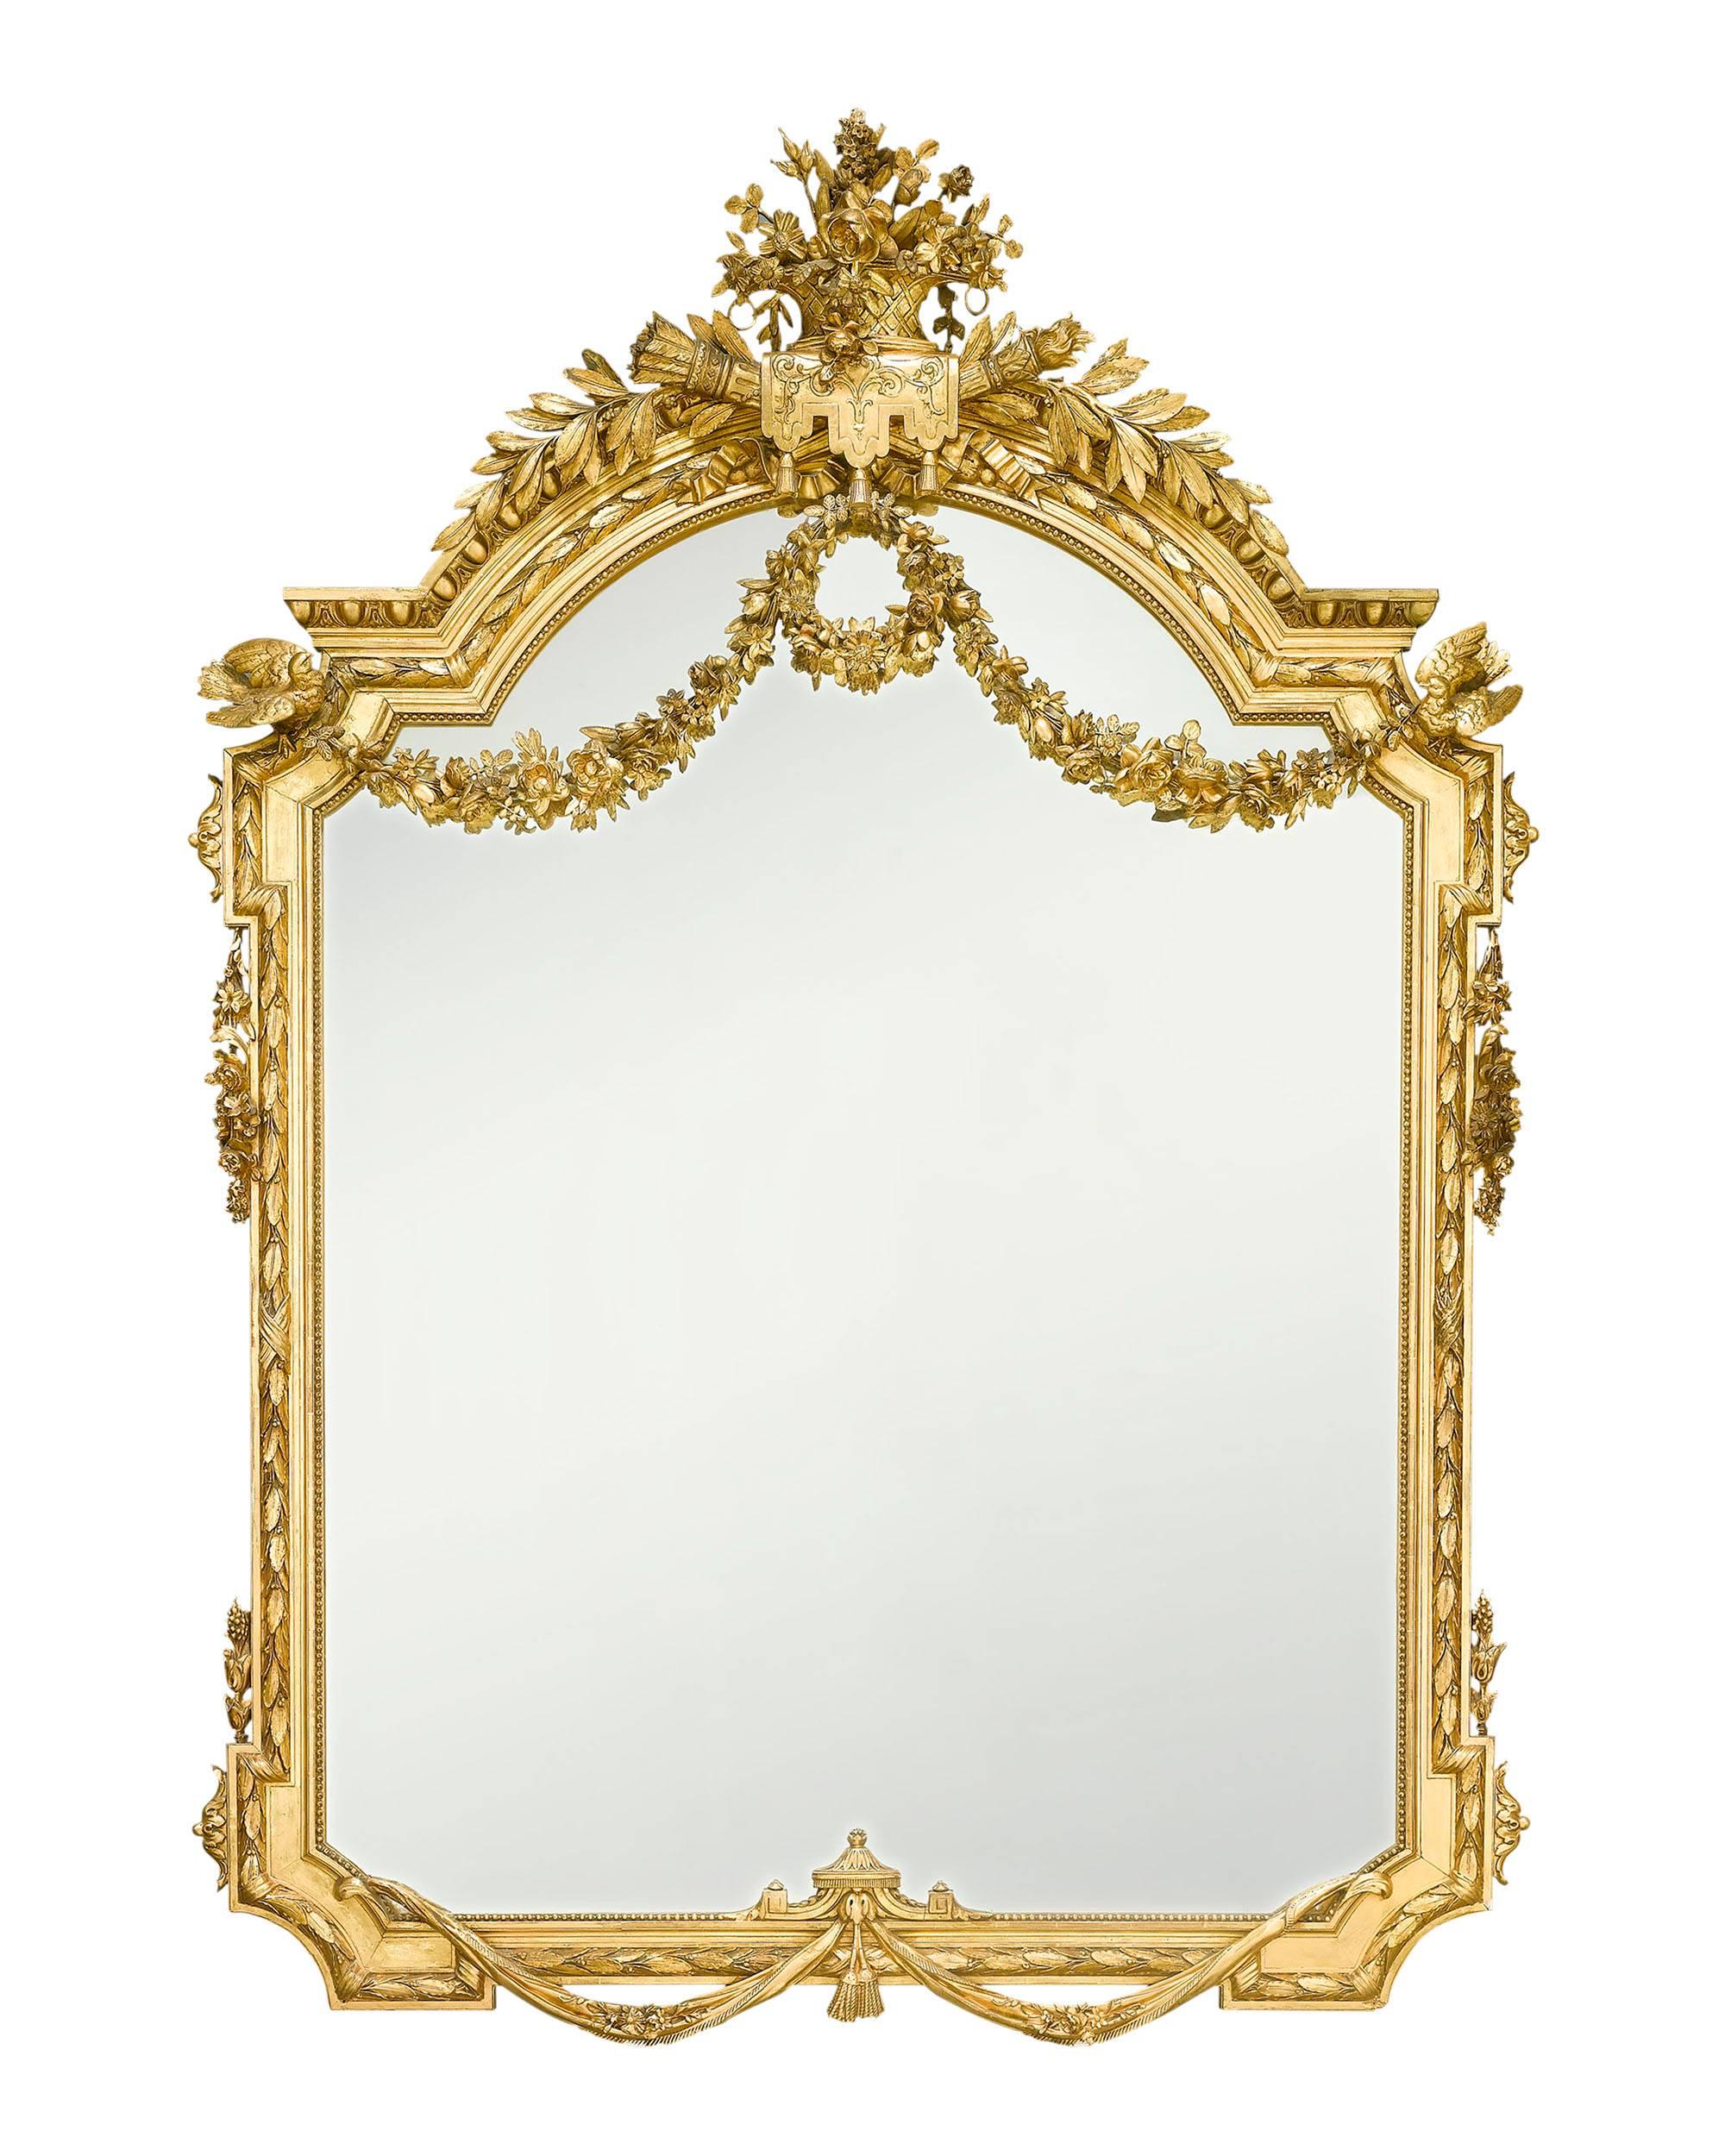 Grand in size and decoration, this exceptional Napoleon III-period mirror is further set apart by an elaborate giltwood frame that features decorative elements such as garlands, doves, a basket of flowers and Apollo's torch. The magnificent size,